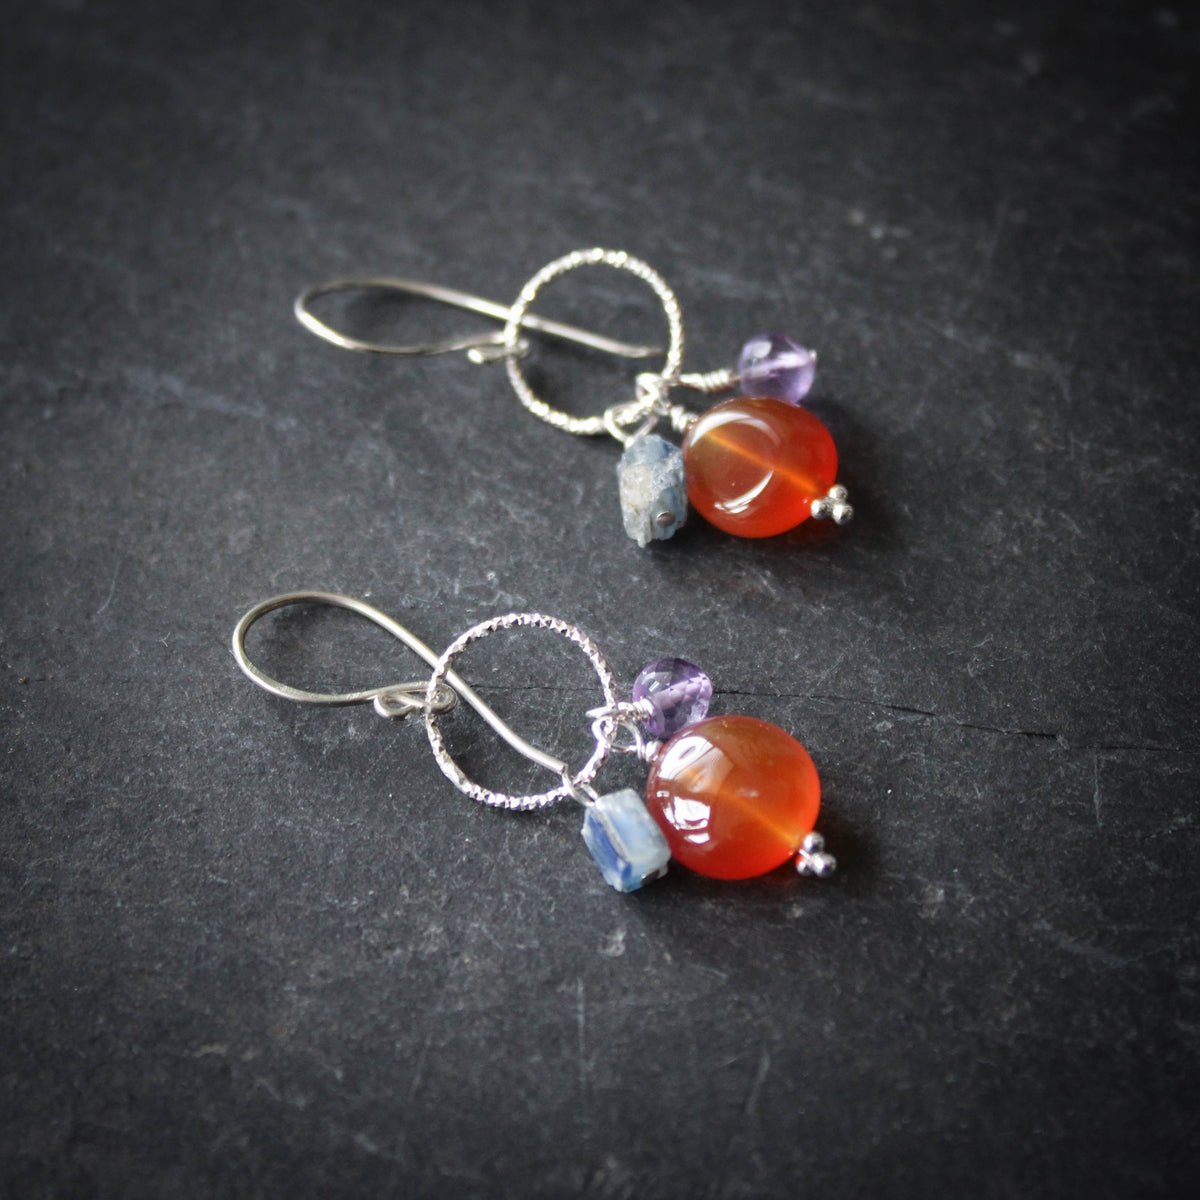 Solstice Cantrip Earrings in Sterling Silver with Carnelian, Kyanite a ...